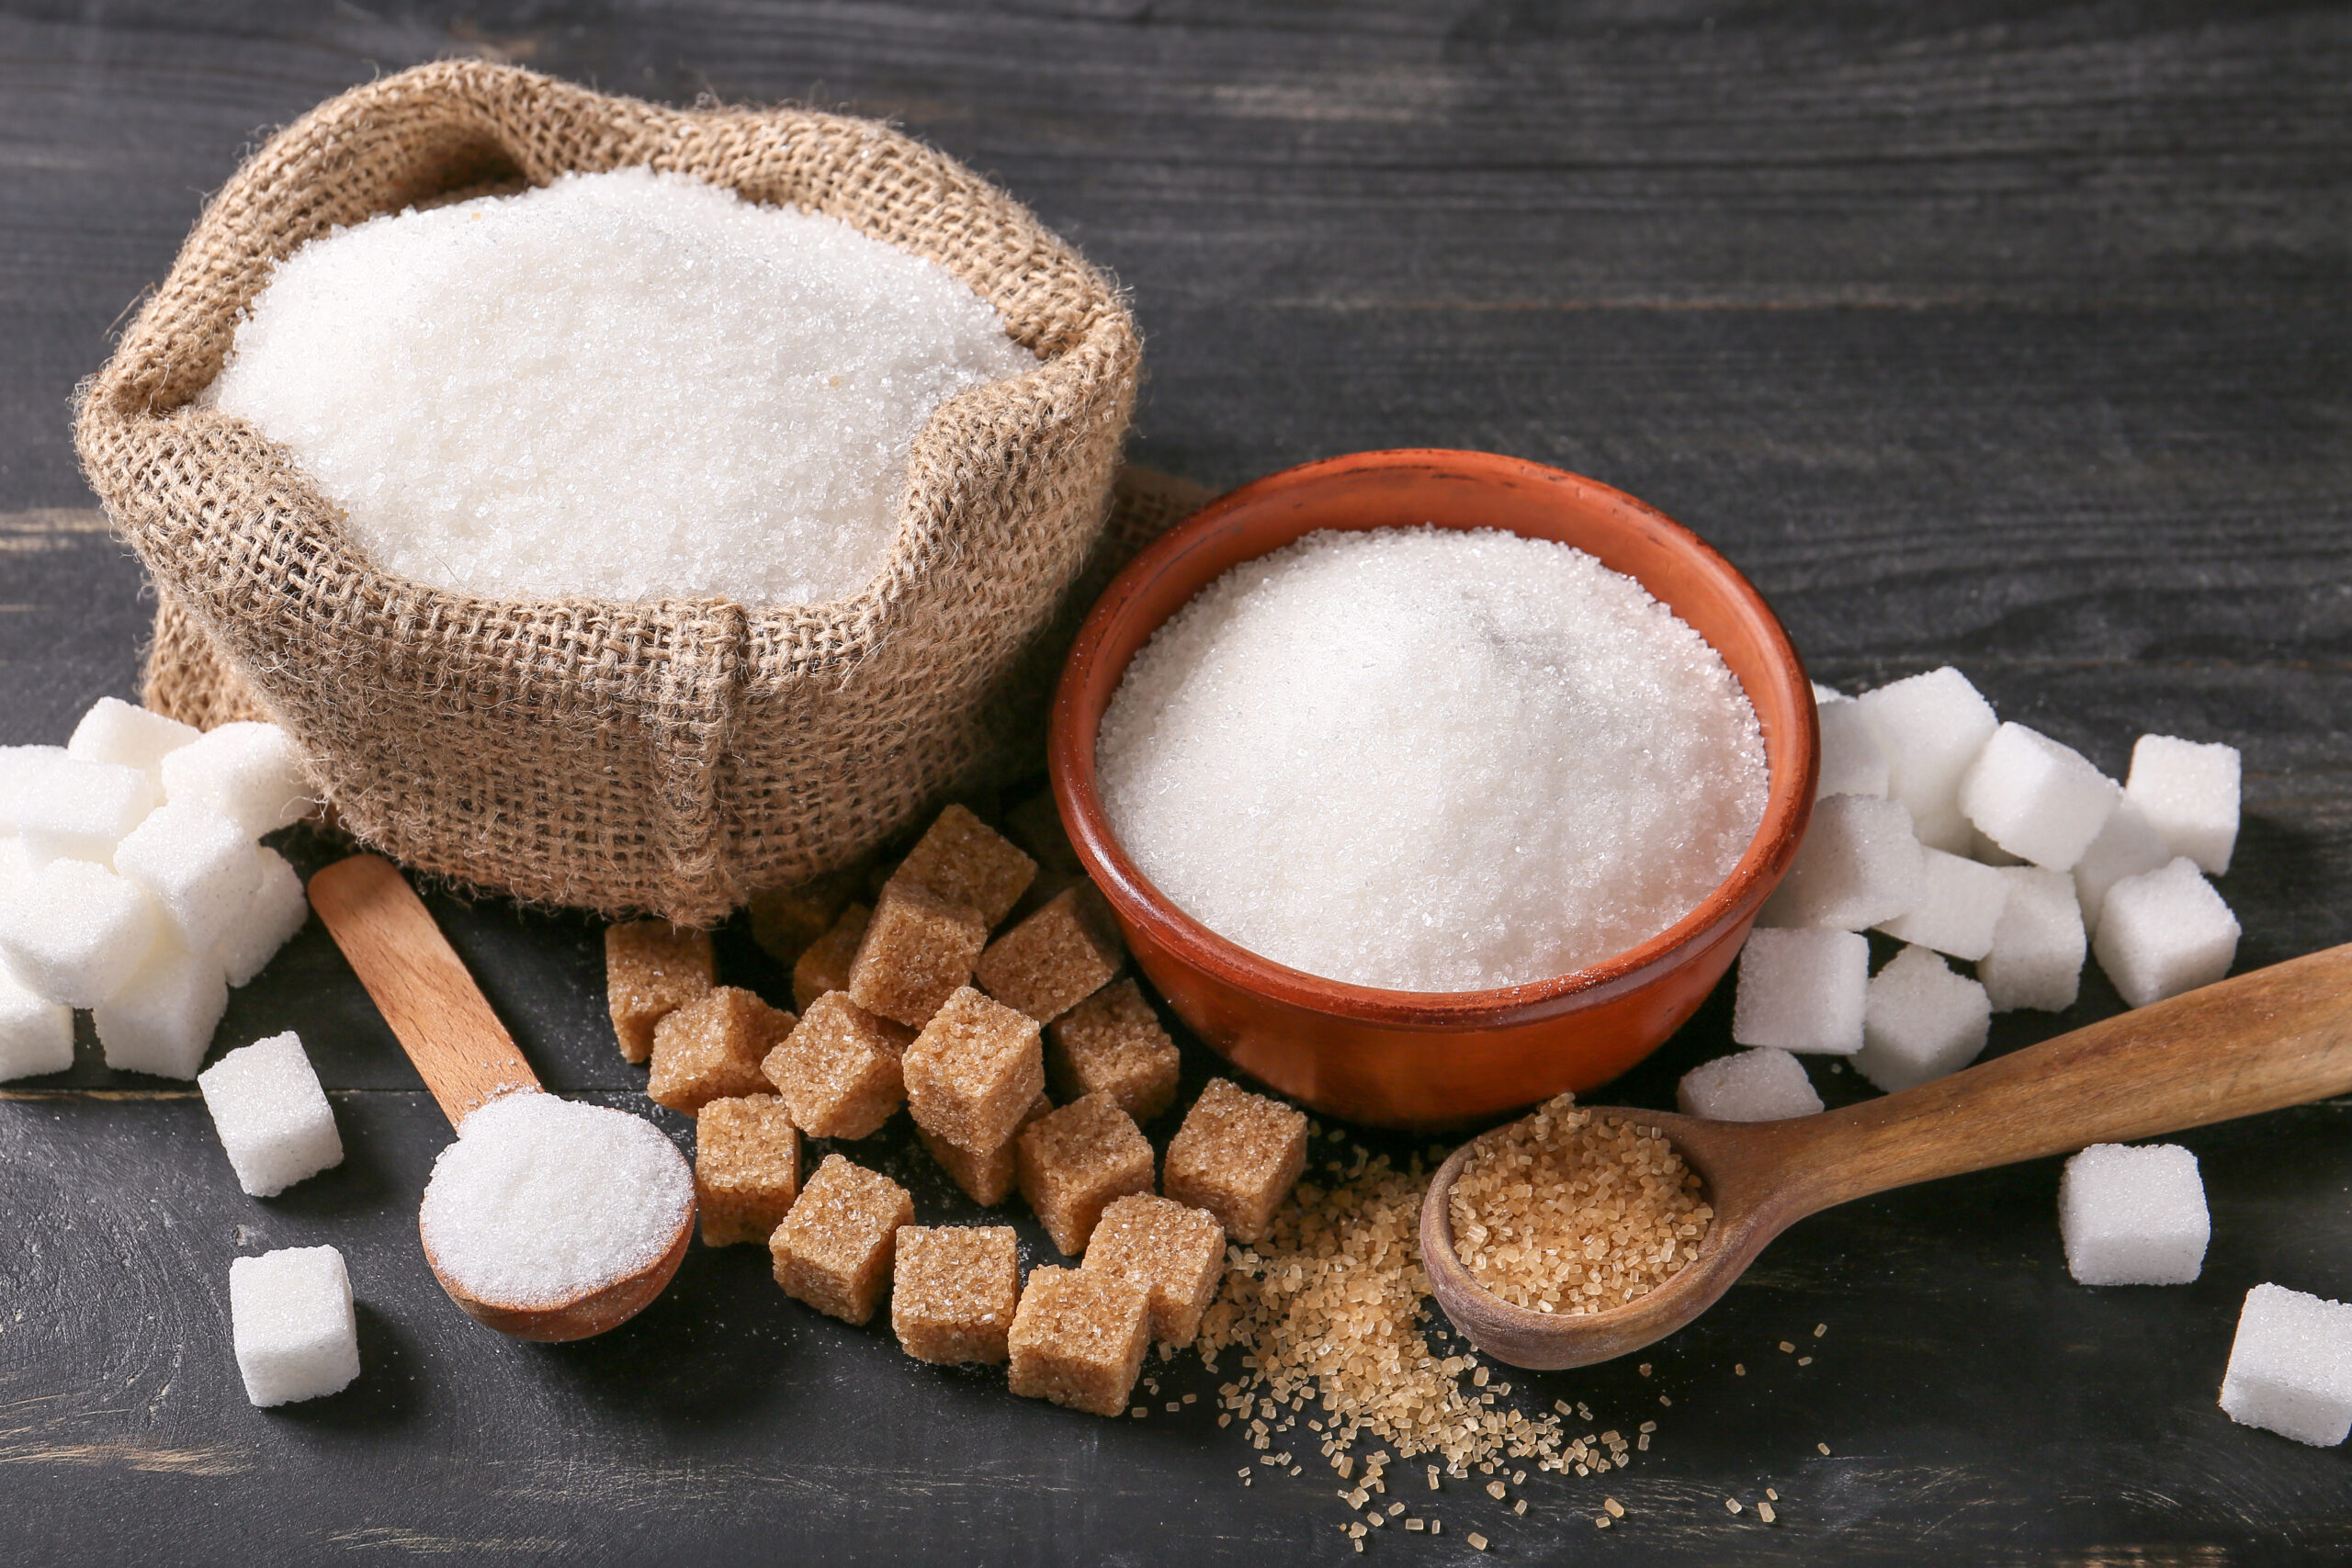 How To Sell Sugar To Overseas Buyers Efficiently?